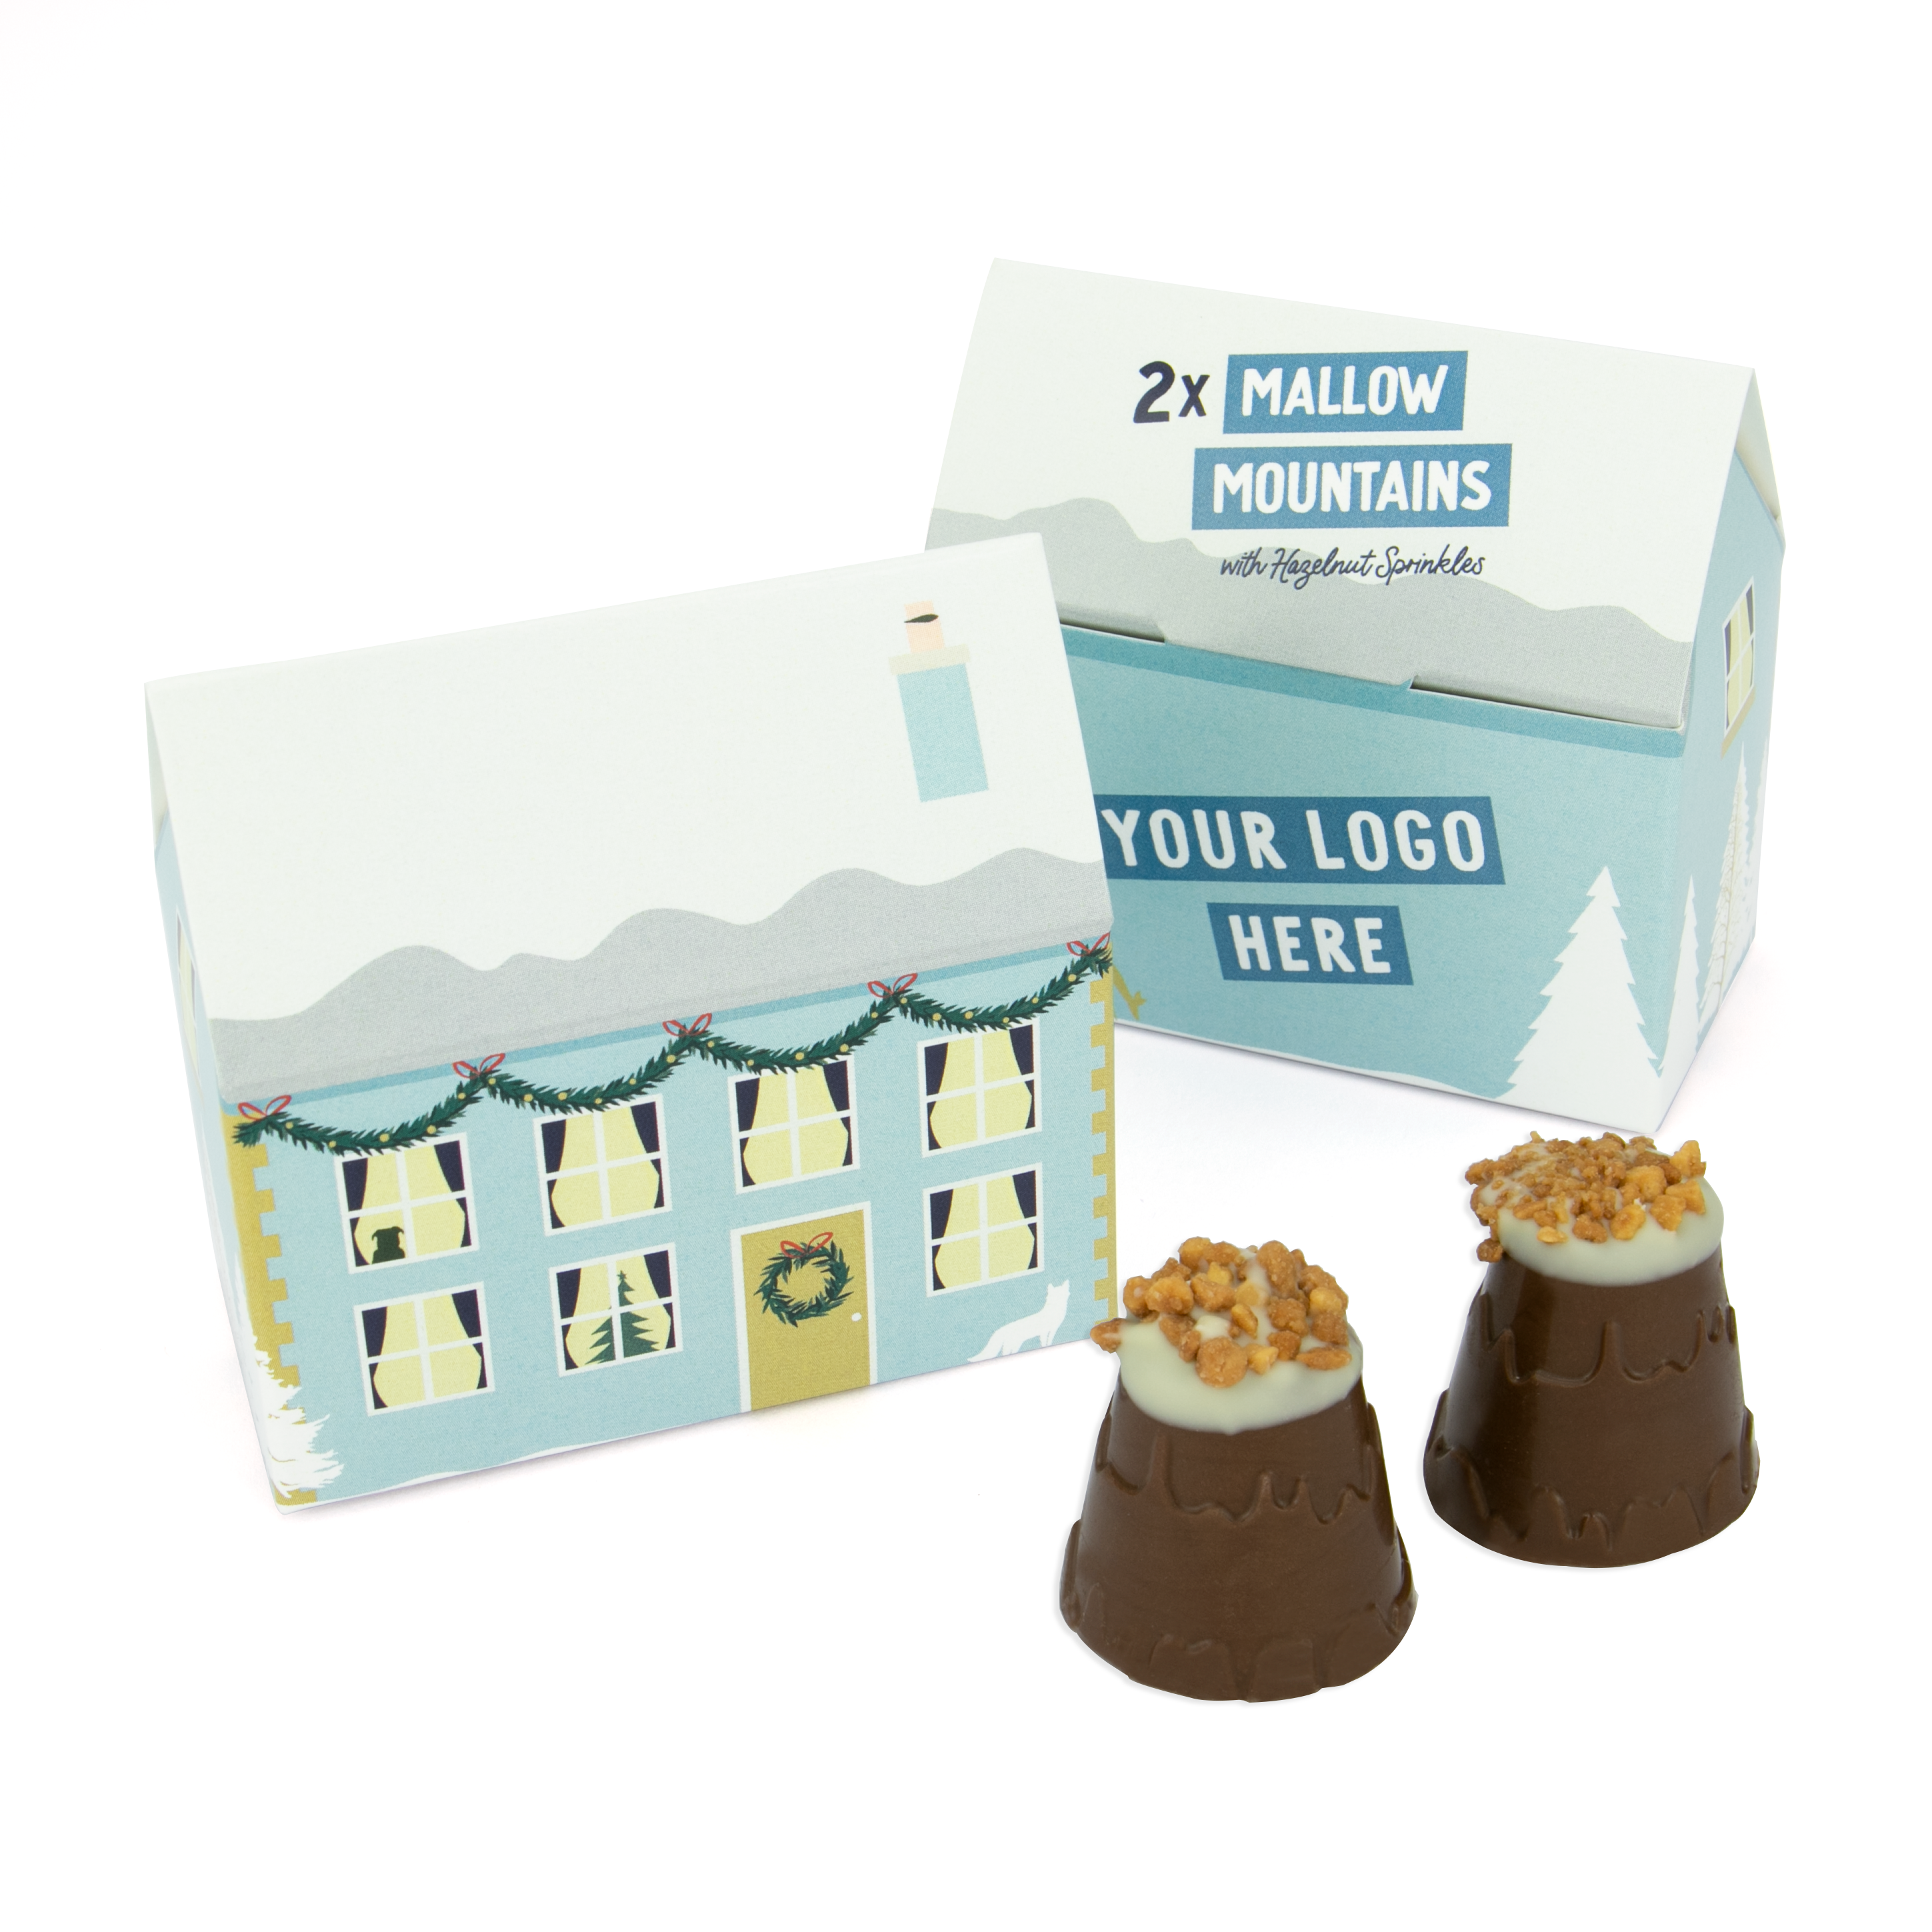 Winter Collection - Eco House Box - Mallow Mountain with Hazelnut Sprinkles* - x2